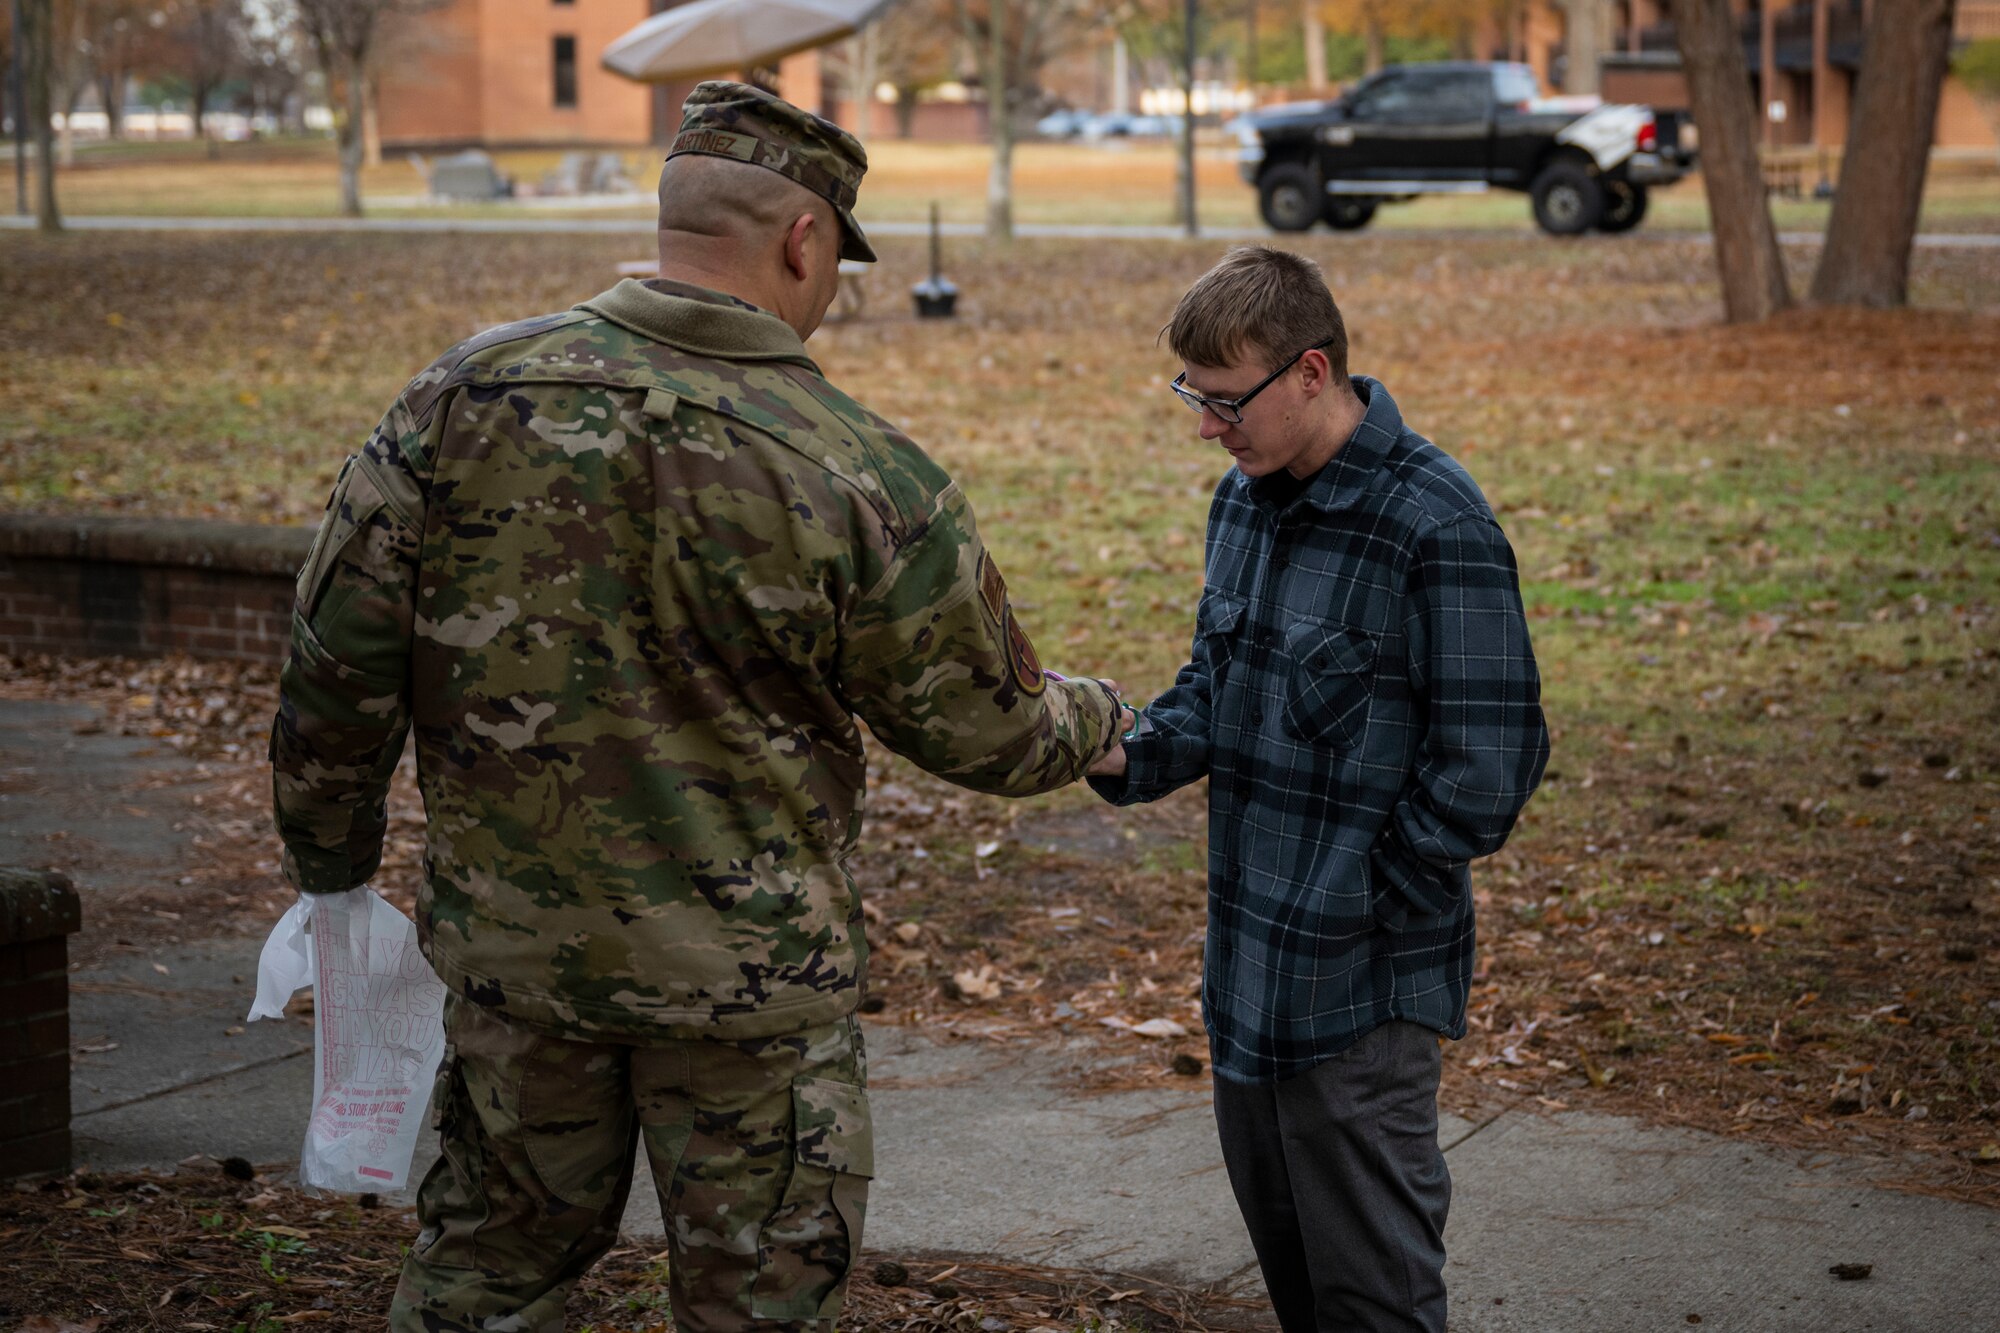 Chief Master Sgt. Peter Martinez, 4th Fighter Wing command chief, shakes hands with an Airman assigned to the 4th FW while handing out cookies as part of the annual cookie drive at Seymour Johnson Air Force Base, North Carolina, Dec. 5, 2022. More than 6,000 cookies donated for 600 dorm Airmen.